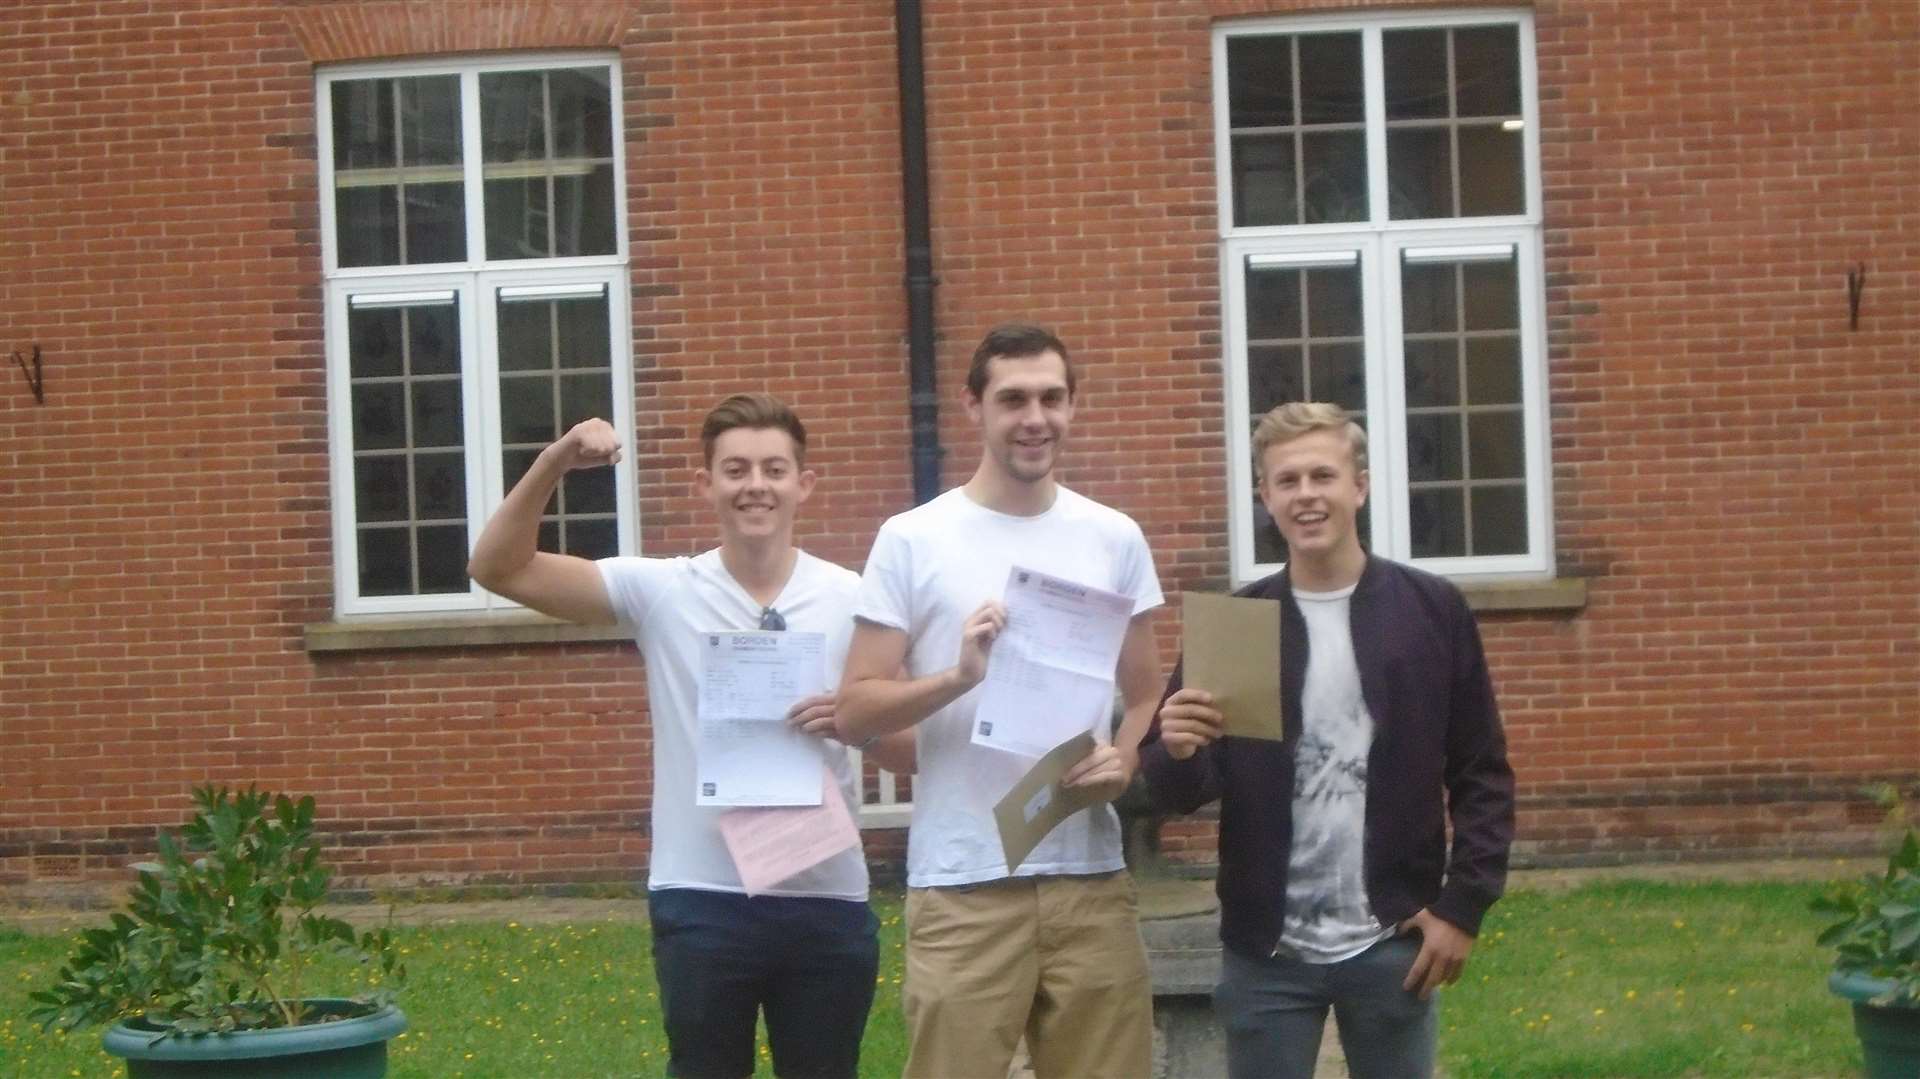 Borden students, from left, Luke Friend, Robert Harris and Scott Hazell with their results